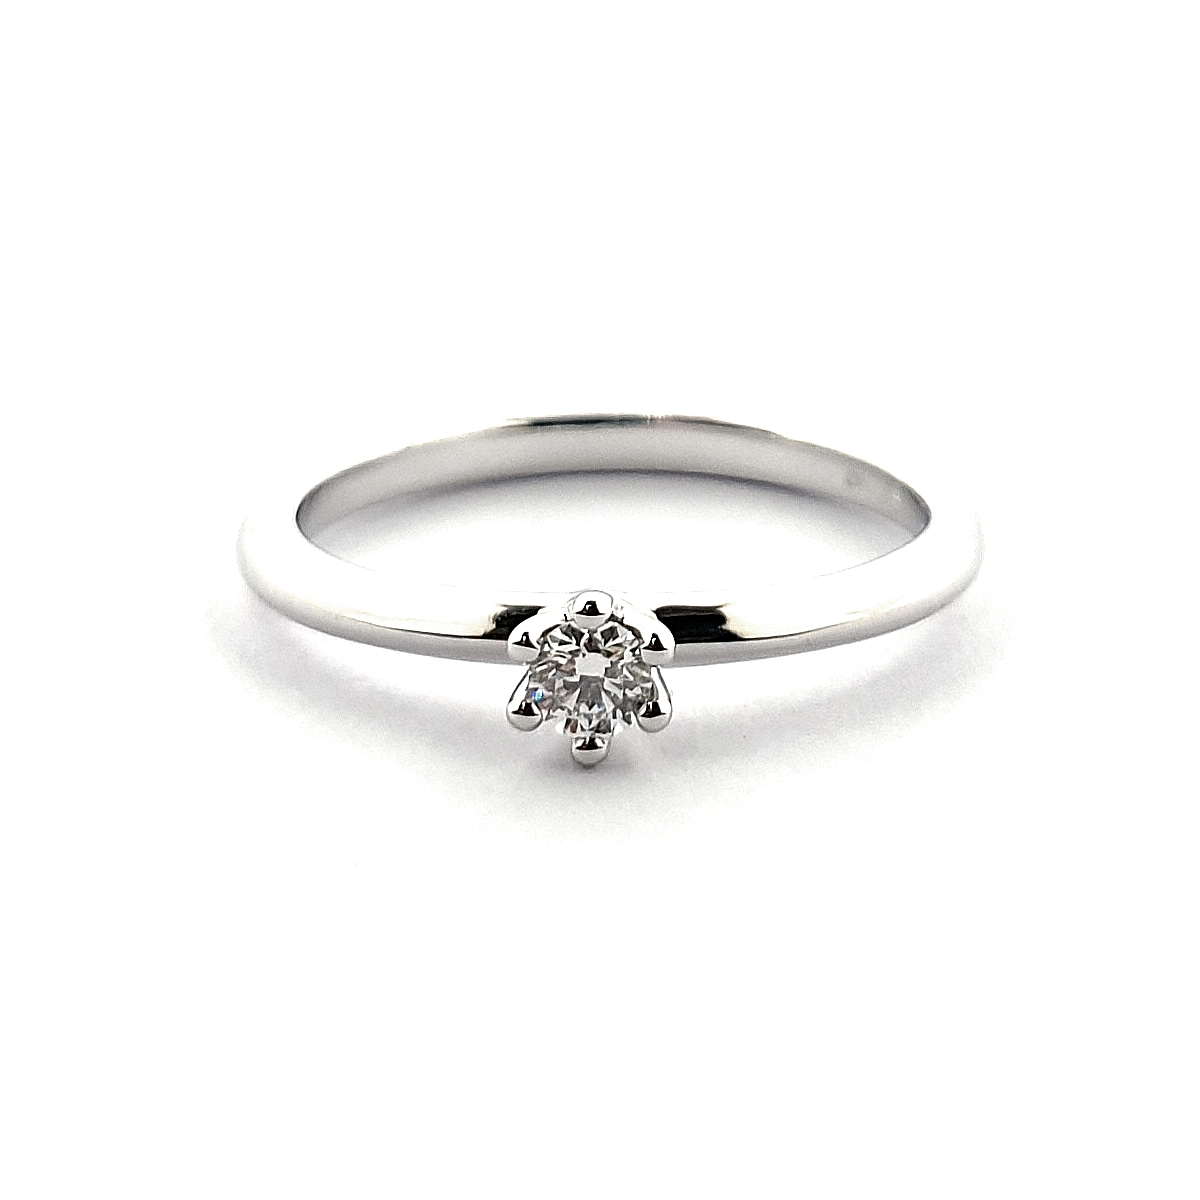 750 Mill. White Gold Ring with 0,10 Ct. F-Vs Diamond